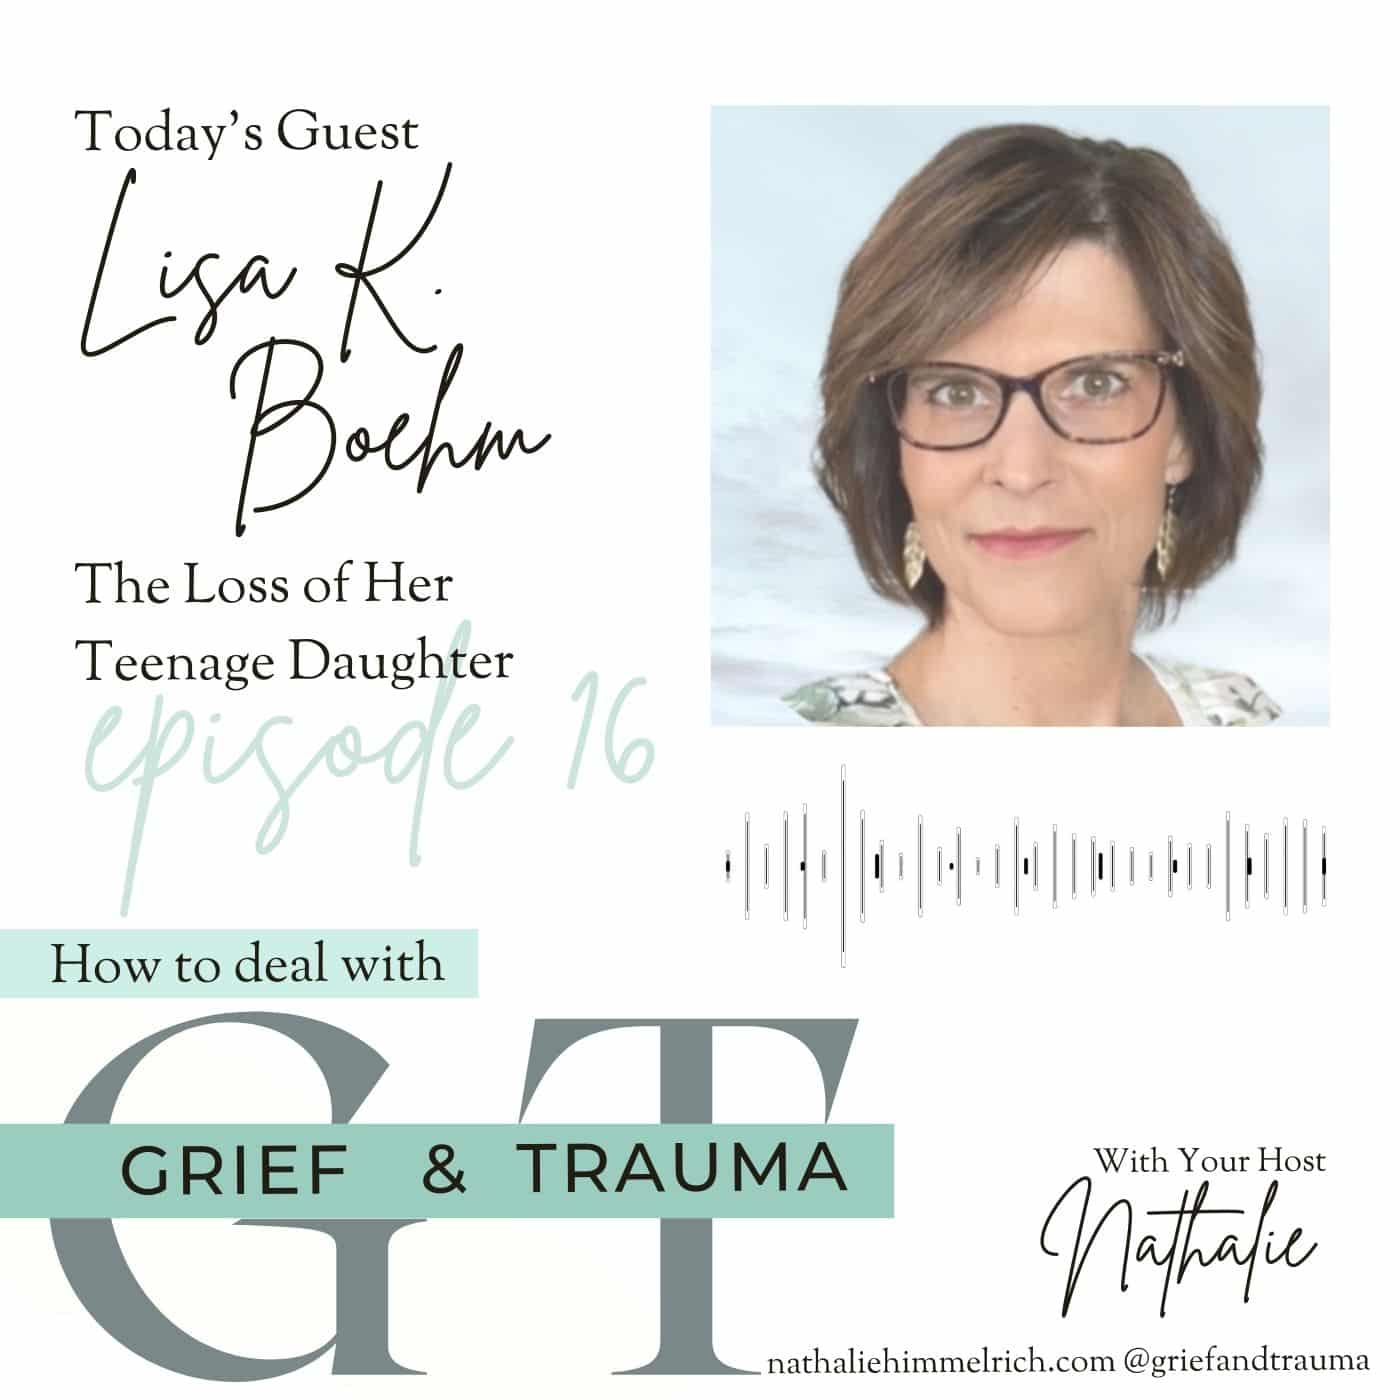 Nathalie with Lisa Boehm on the Loss of Her Teenage Daughter | Episode 16